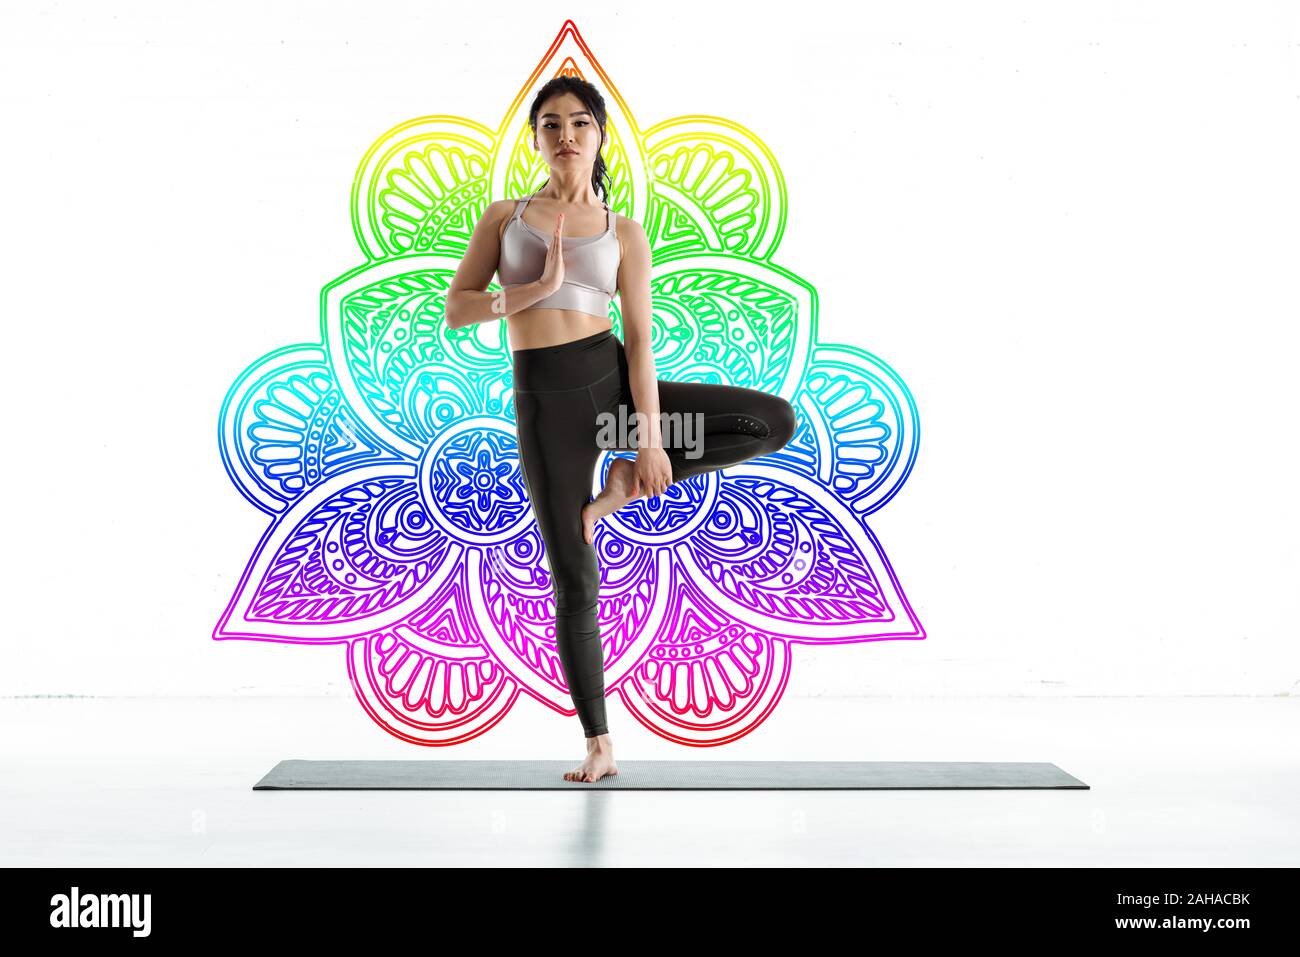 Yoga Girl. Yoga Vibes Colorful Concept Poster Stock Photo, Picture and  Royalty Free Image. Image 110526867.